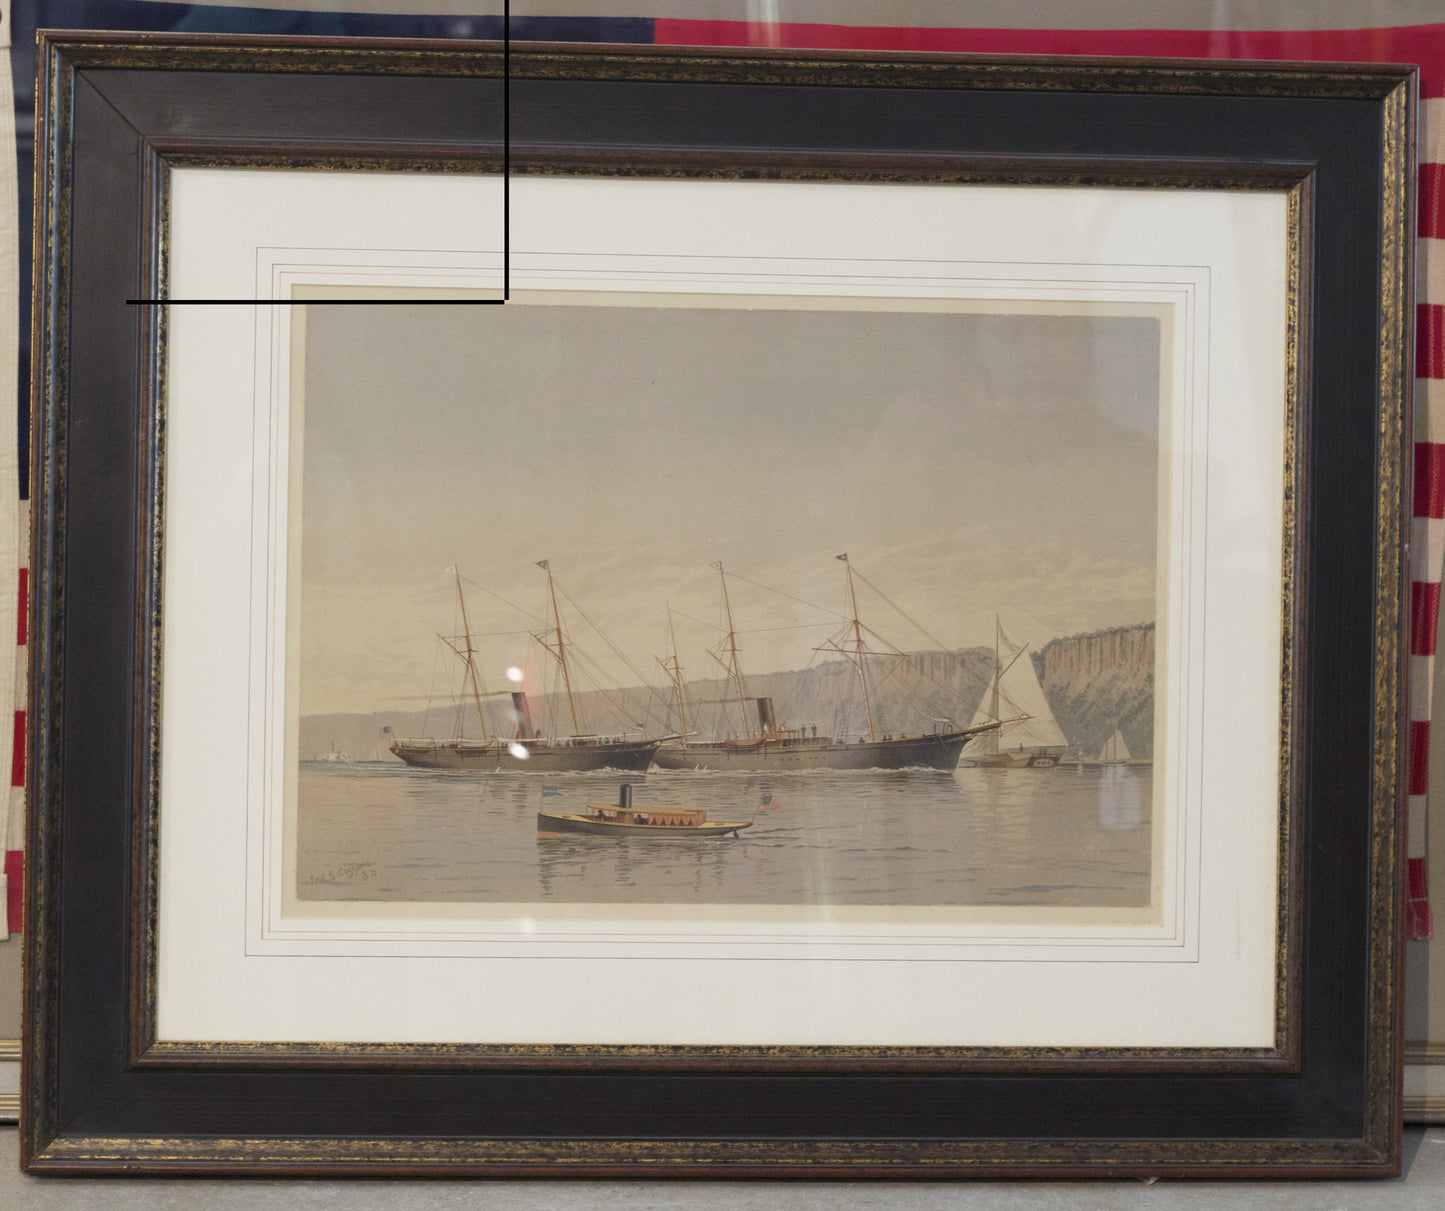 Framed Print by Cozzens of Steam Yachts - Lannan Gallery